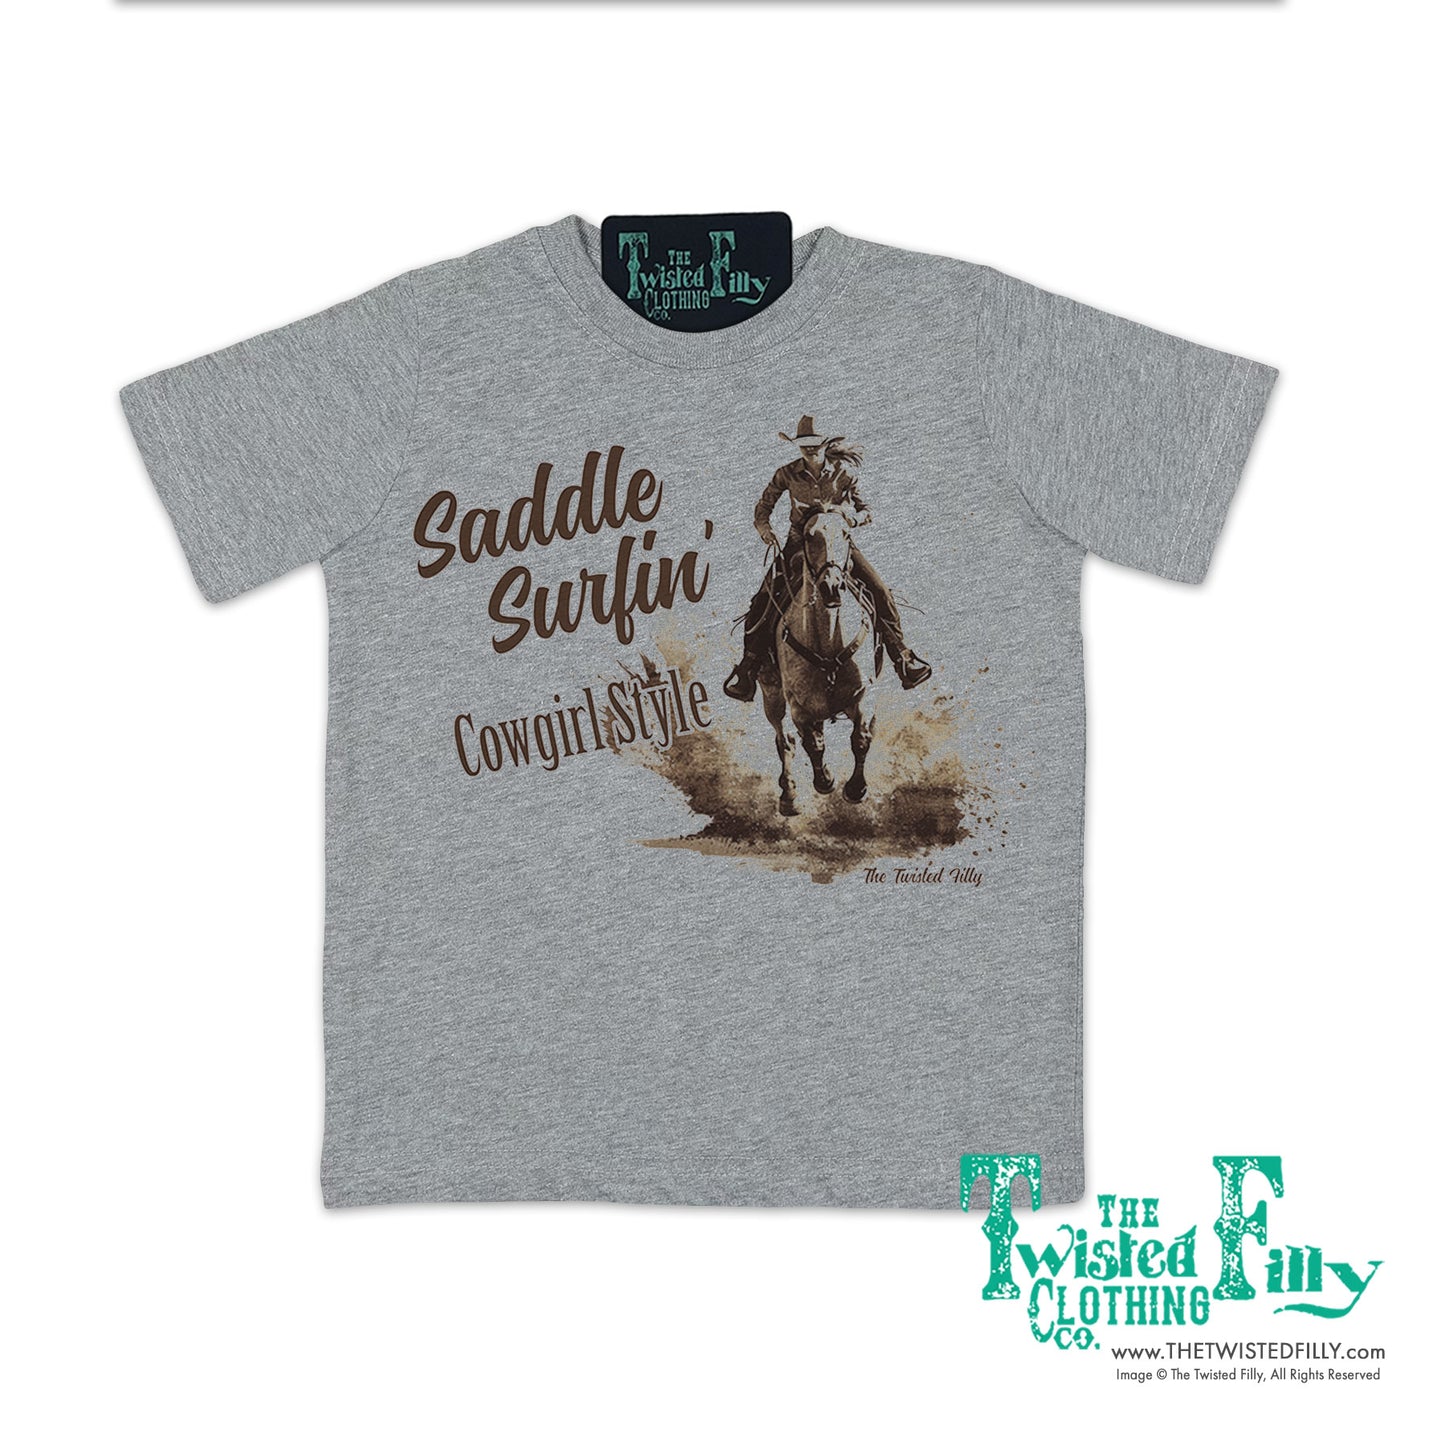 Saddle Surfin' Cowgirl Style - S/S Girls Toddler Tee - Assorted Colors